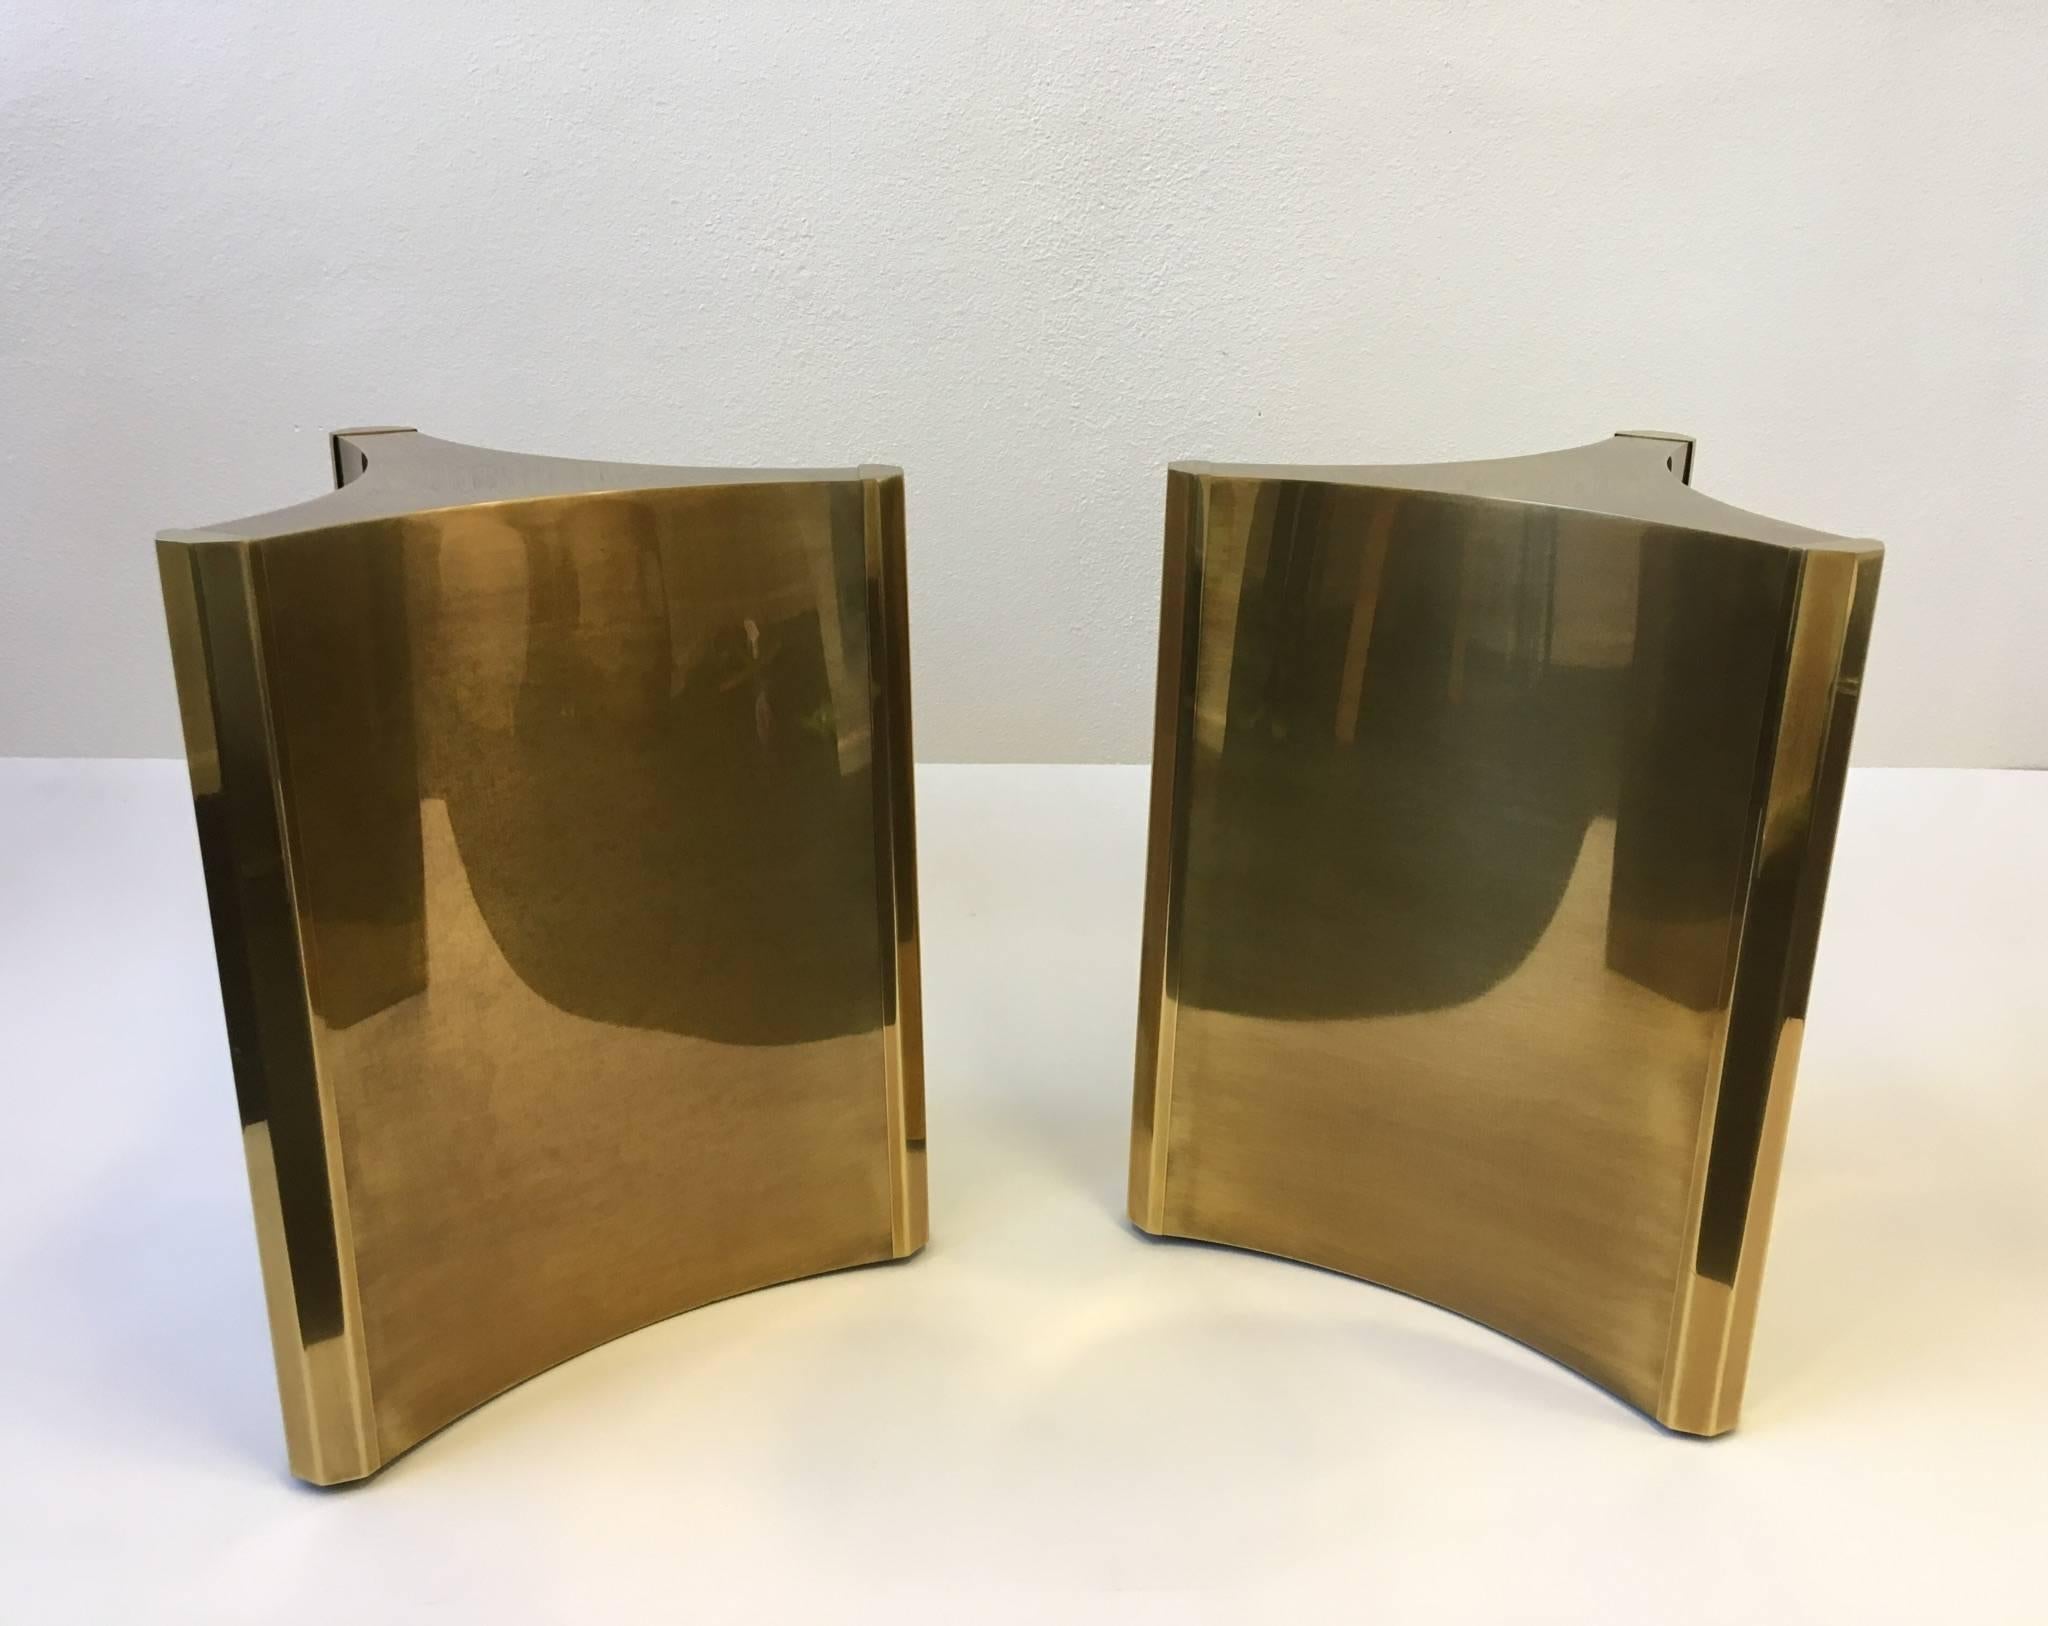 A glamorous pair of 1970s aged brass dining table pedestals by Mastercraft. This have the original Mastercraft patina. If you need glass, let us know. Price is just for pedestal for easy shipping.
Dimensions: 27.5